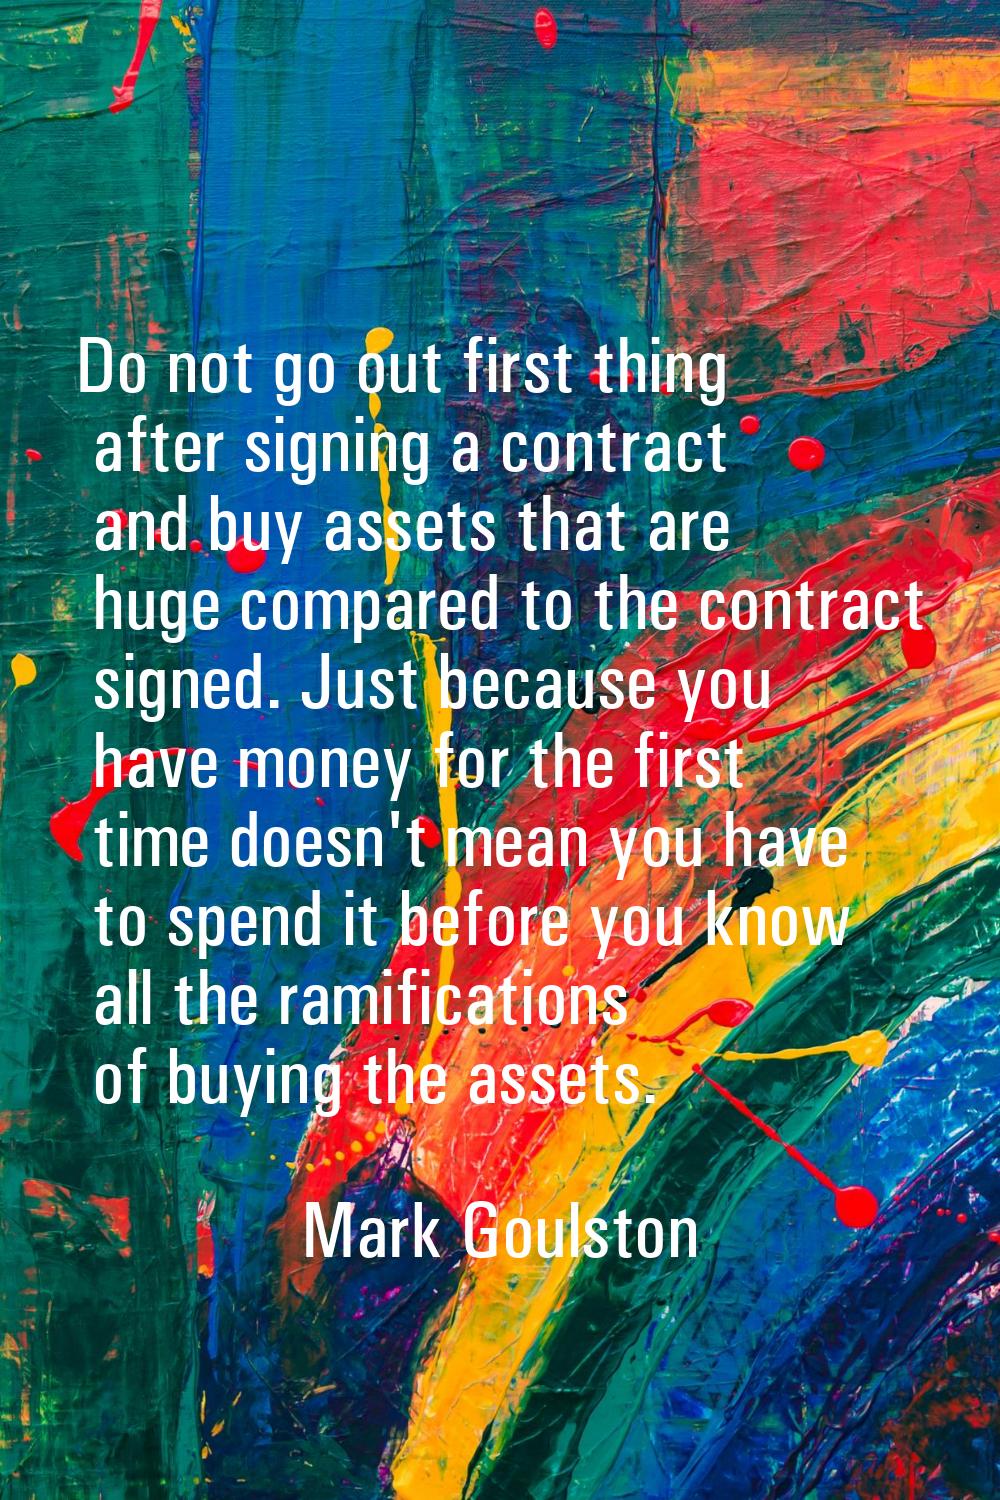 Do not go out first thing after signing a contract and buy assets that are huge compared to the con